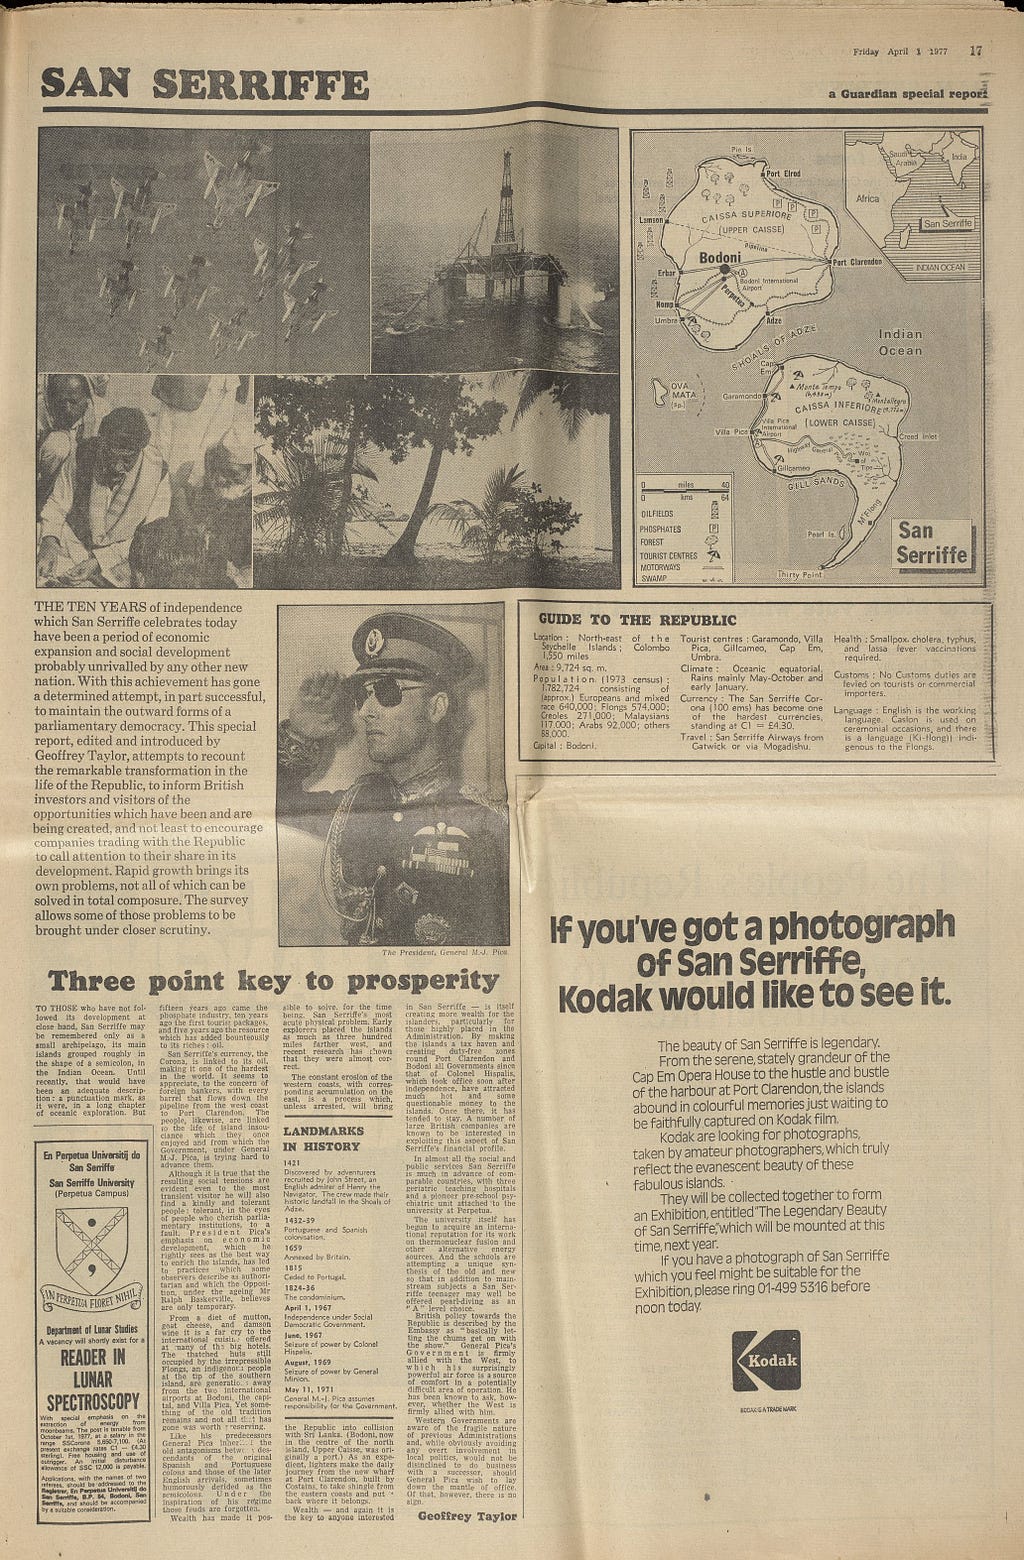 A page from The Guardian’s San Serriffe report showing a map of the island, an advert by Kodak featuring San Serriffe, and an image of General Pica- the leader of the island- saluting. Courtesy of Guardian News & Media.